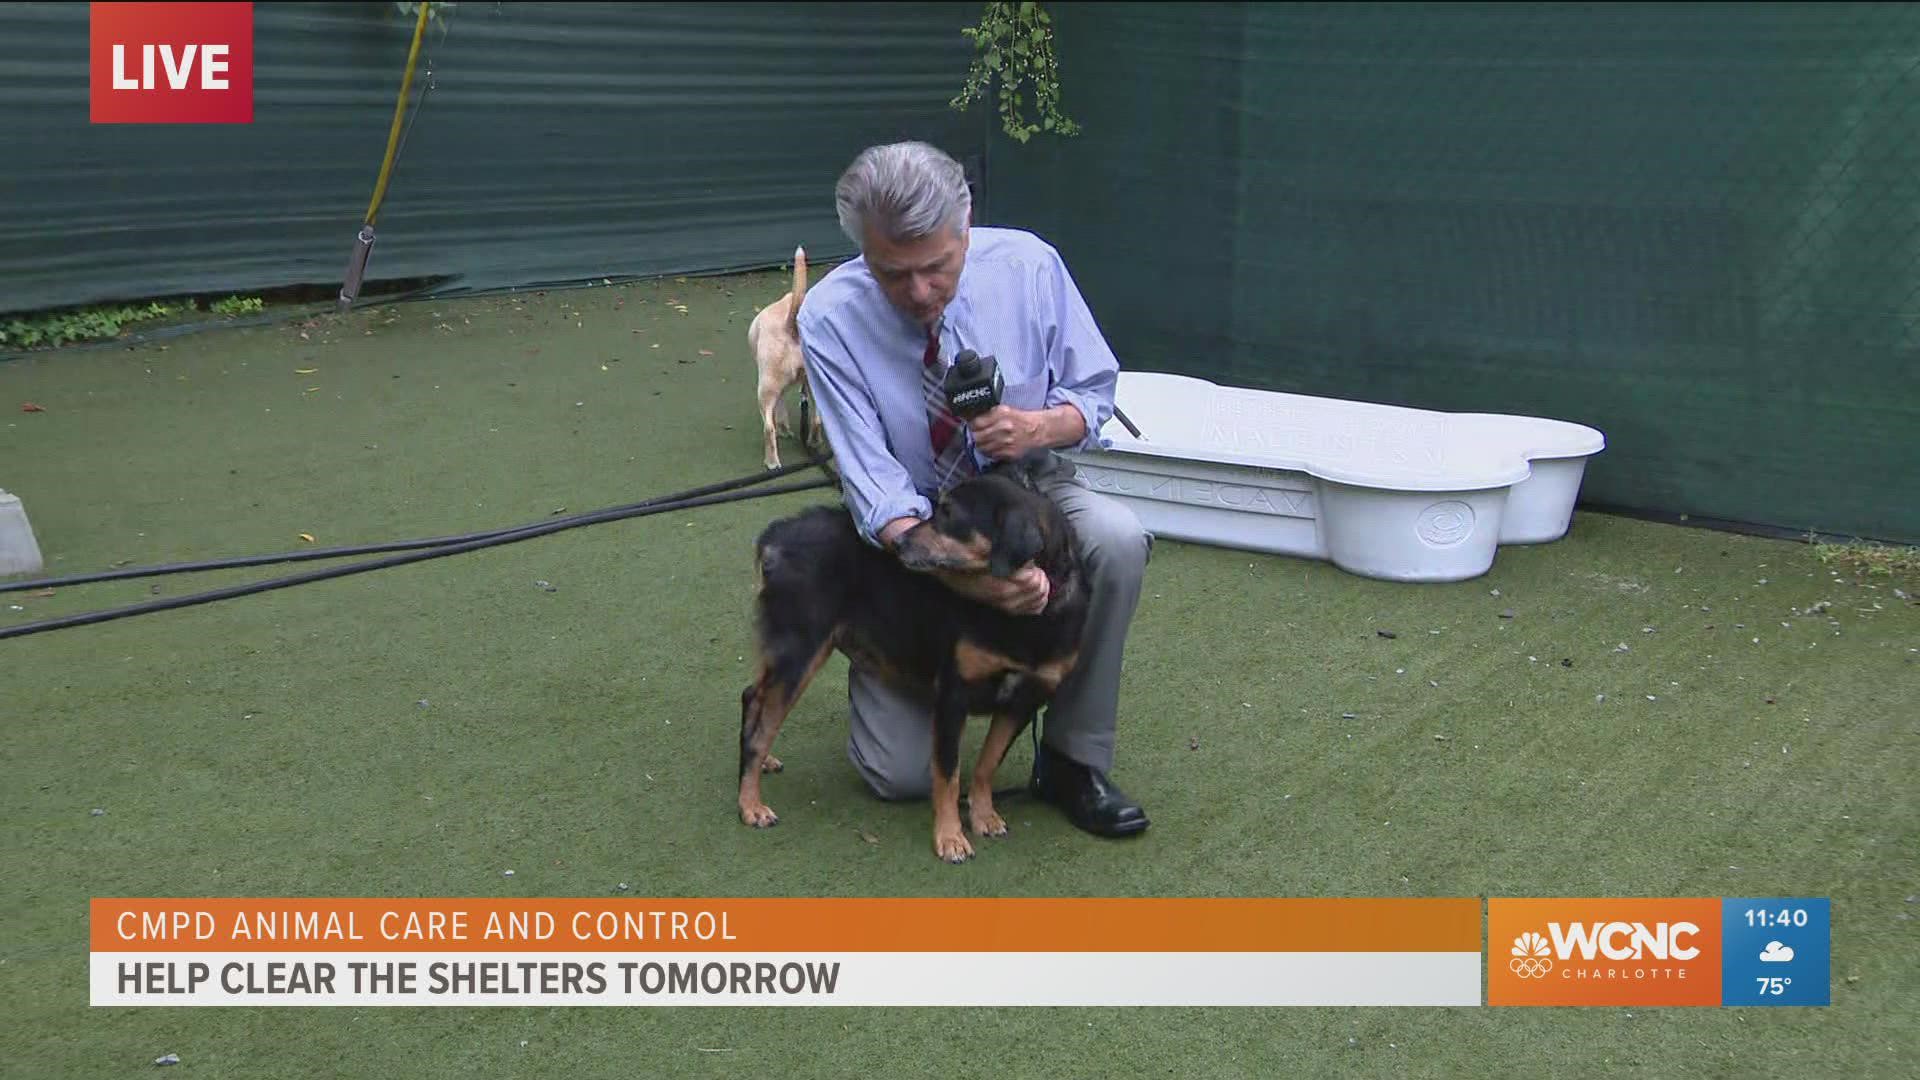 Larry Sprinkle is live from Charlotte Humane Society as they work to Clear the Shelters!